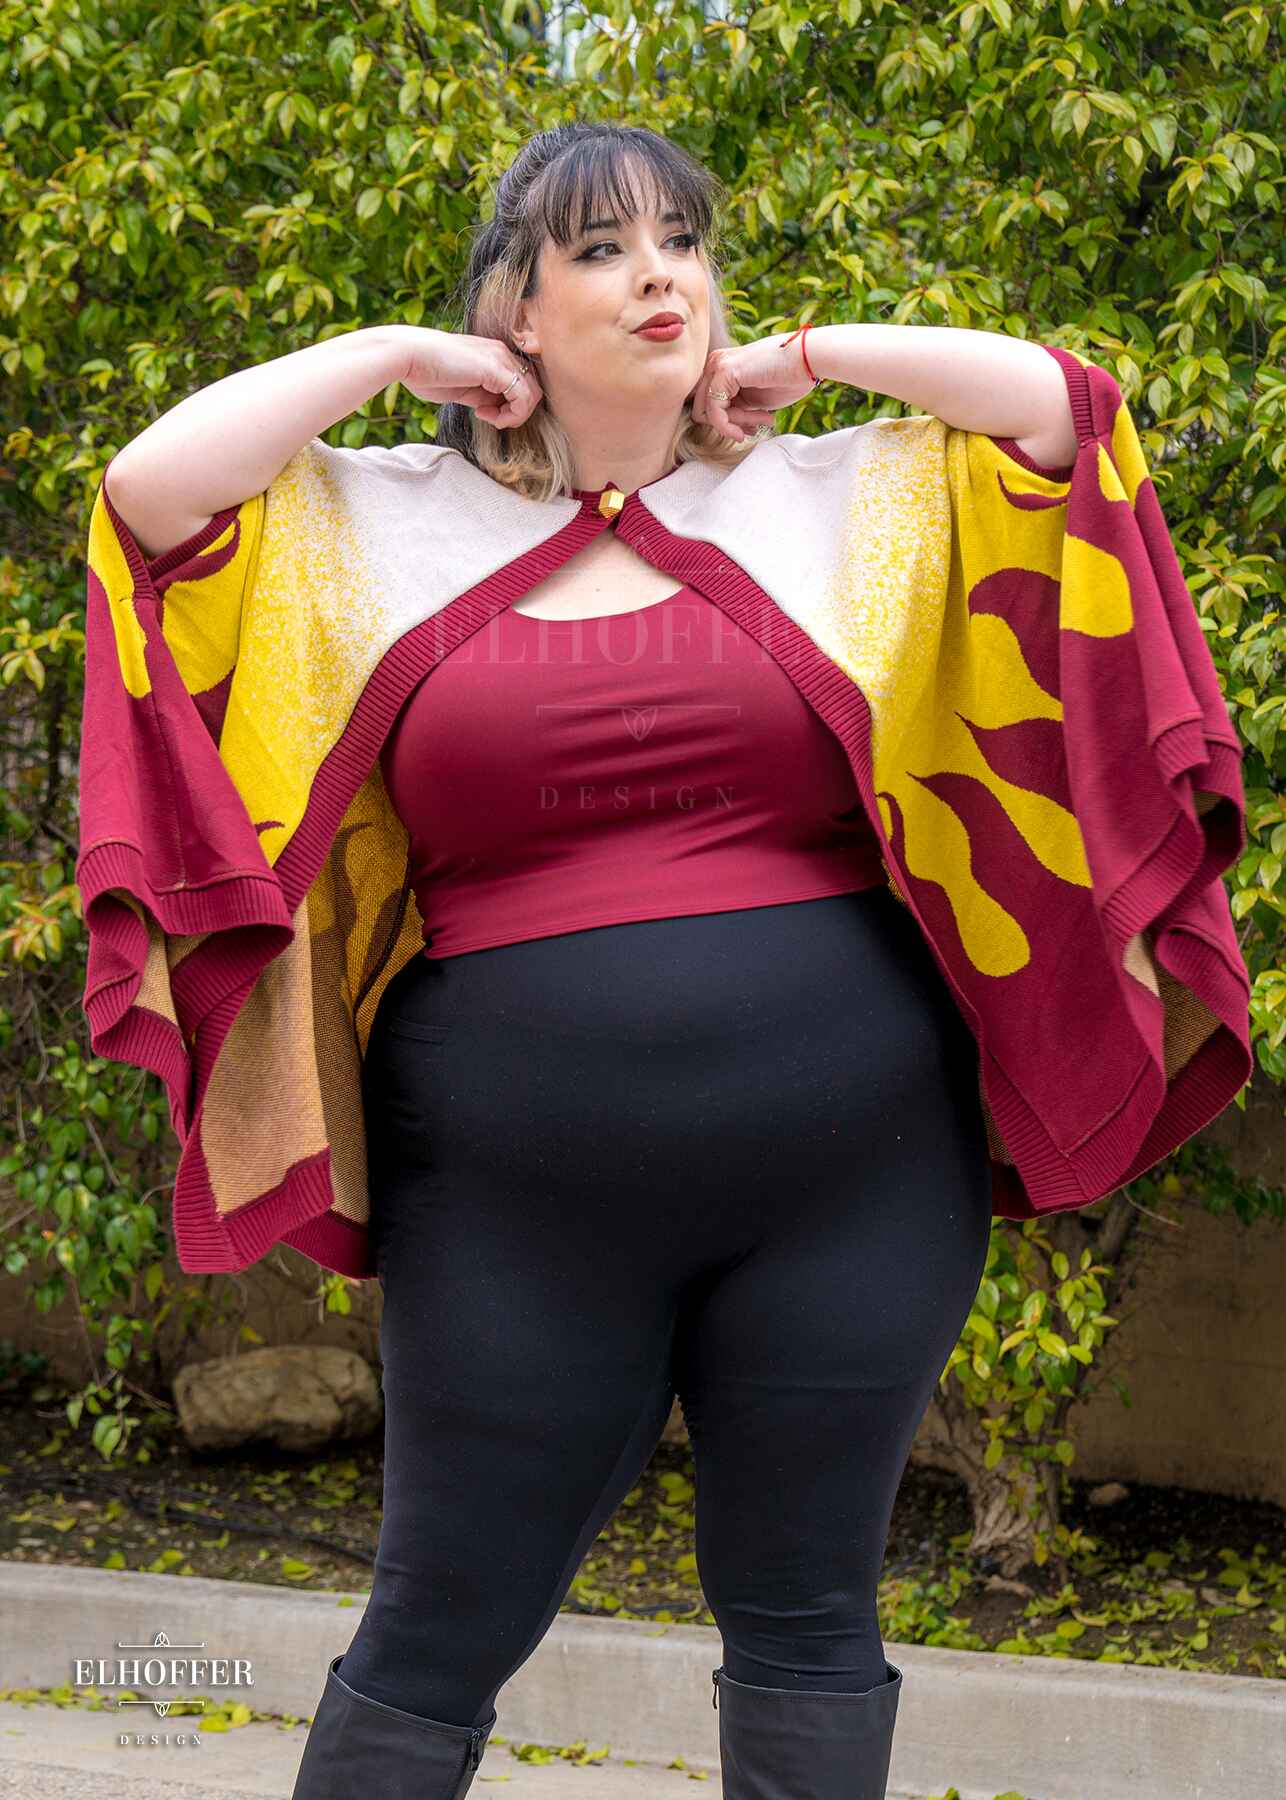 Katie Lynn, a fair skinned 2xl model with short black and blonde hair with bangs, is wearing a below hip length knit cape.  The cape is a gradient of color from white at the shoulders, to yellow, to a red fire design at the bottom, it also has a button closer at the neck, and armholes in the side seam. She paired the cape with a burgundy red scoop neck crop top and black leggings.